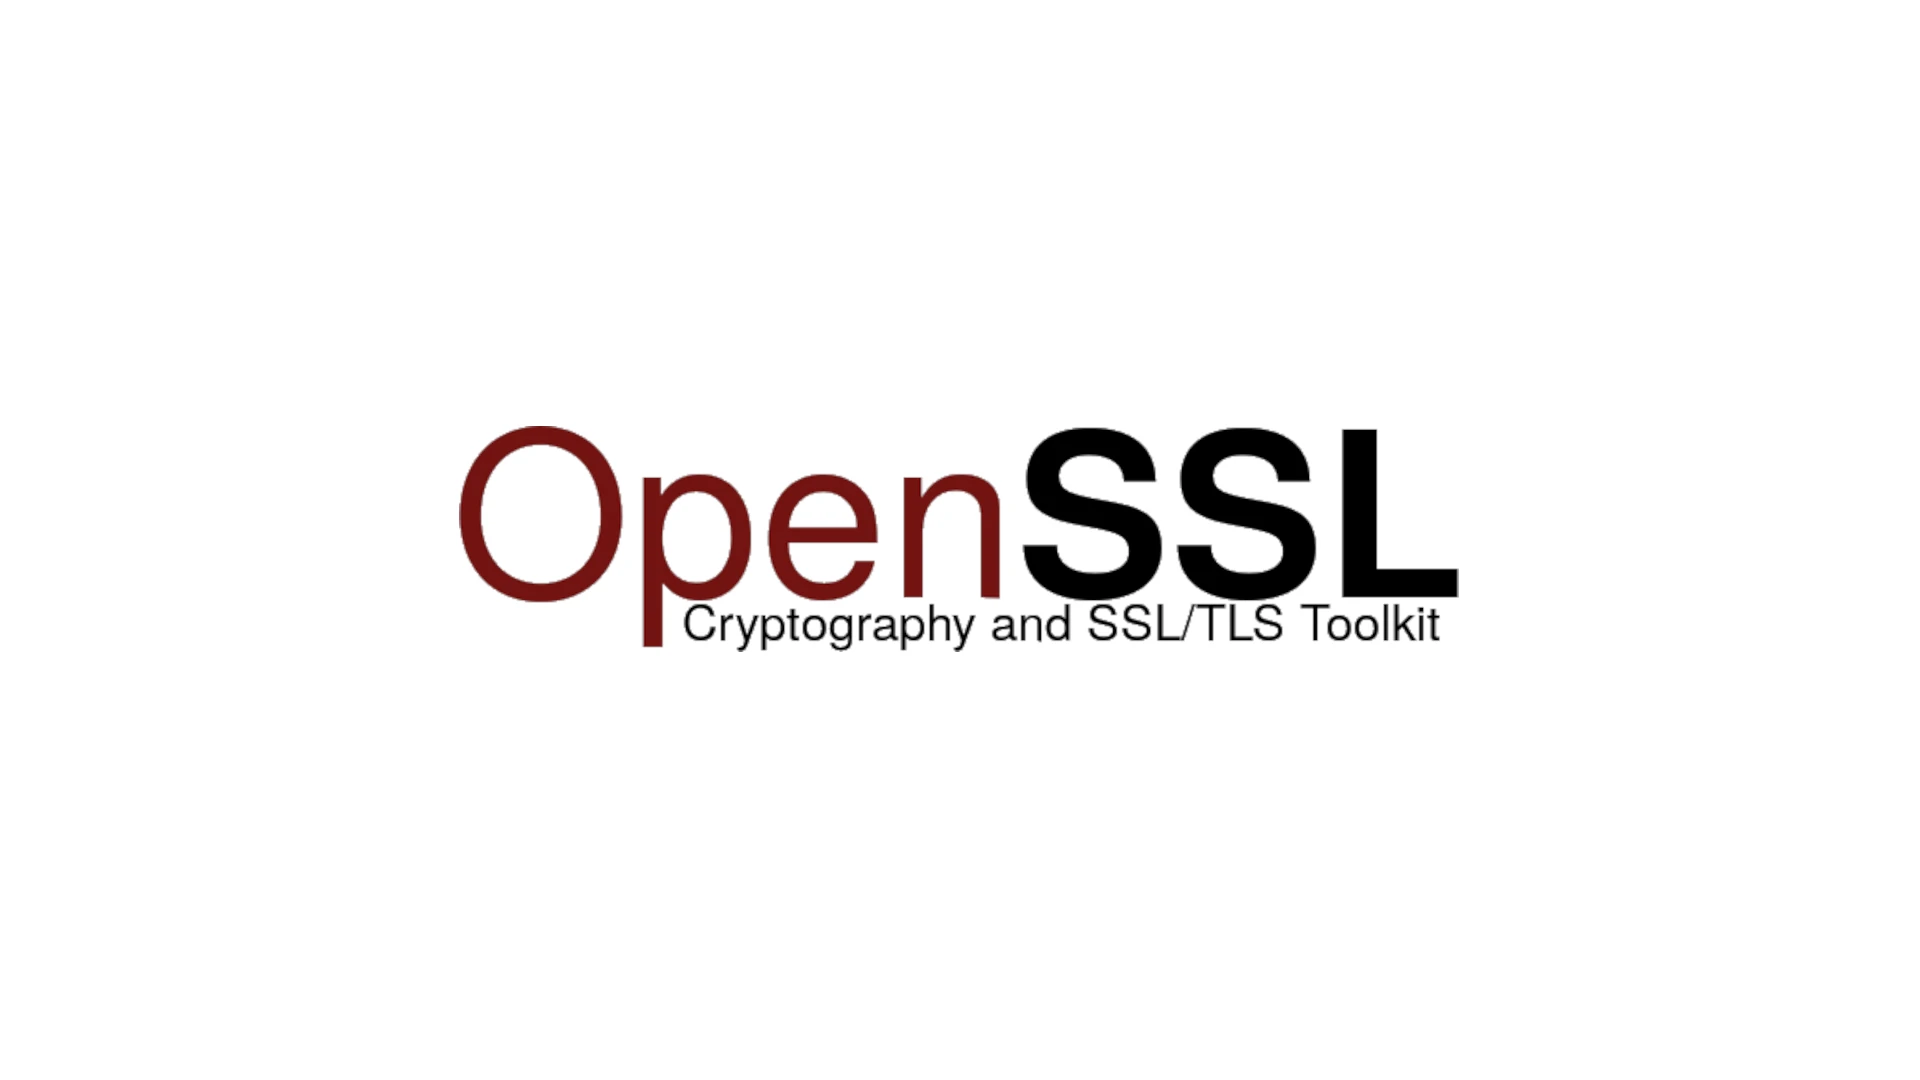 OpenSSL 3.2 Adds Support for TCP Fast Open on Linux, Argon2 KDF, and More